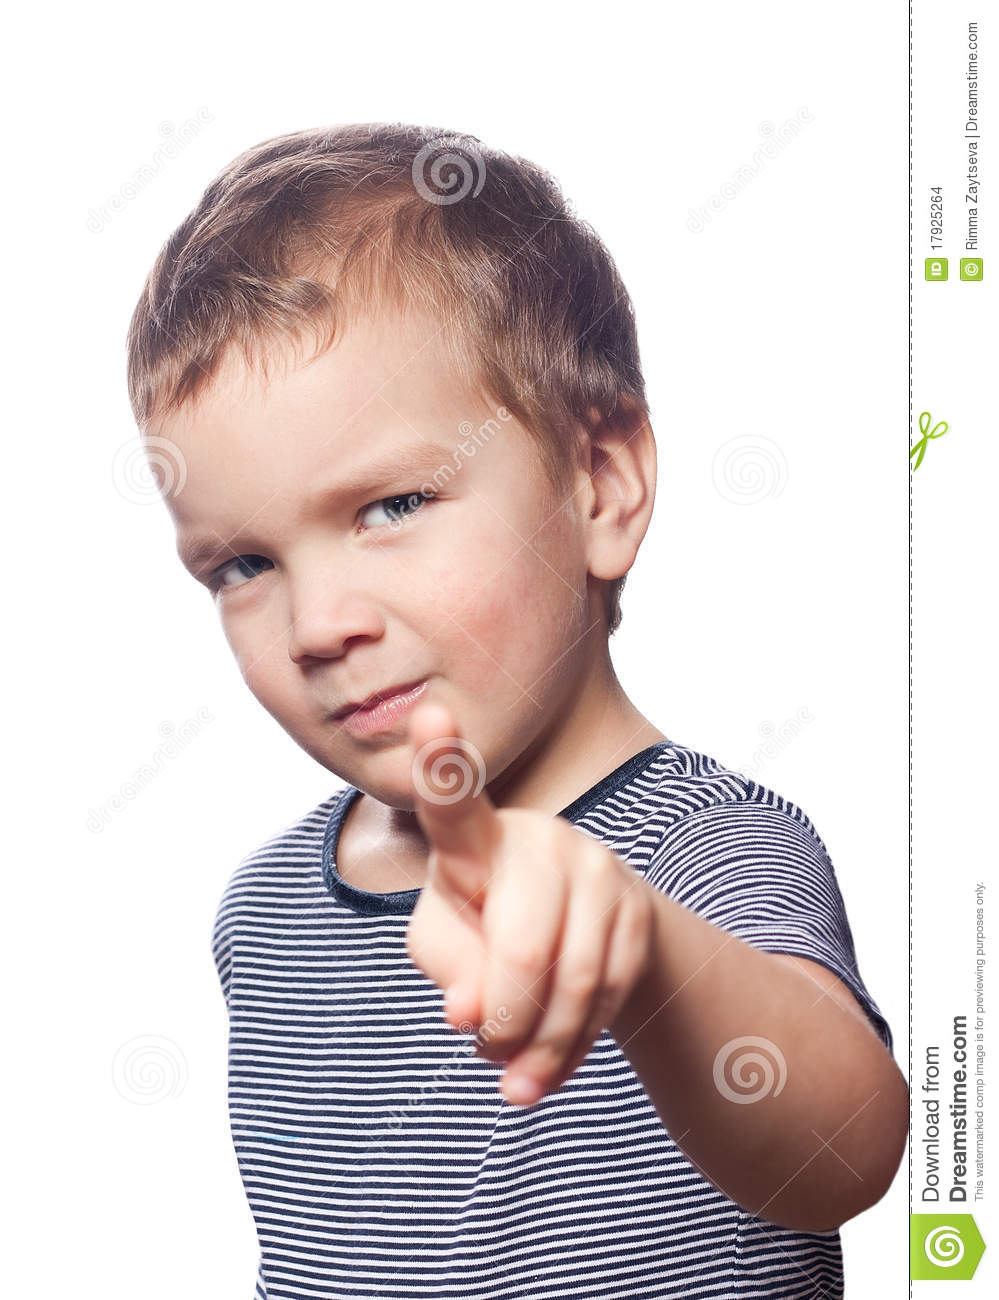 Small Boy Points His Finger Stock Images   Image  17925264